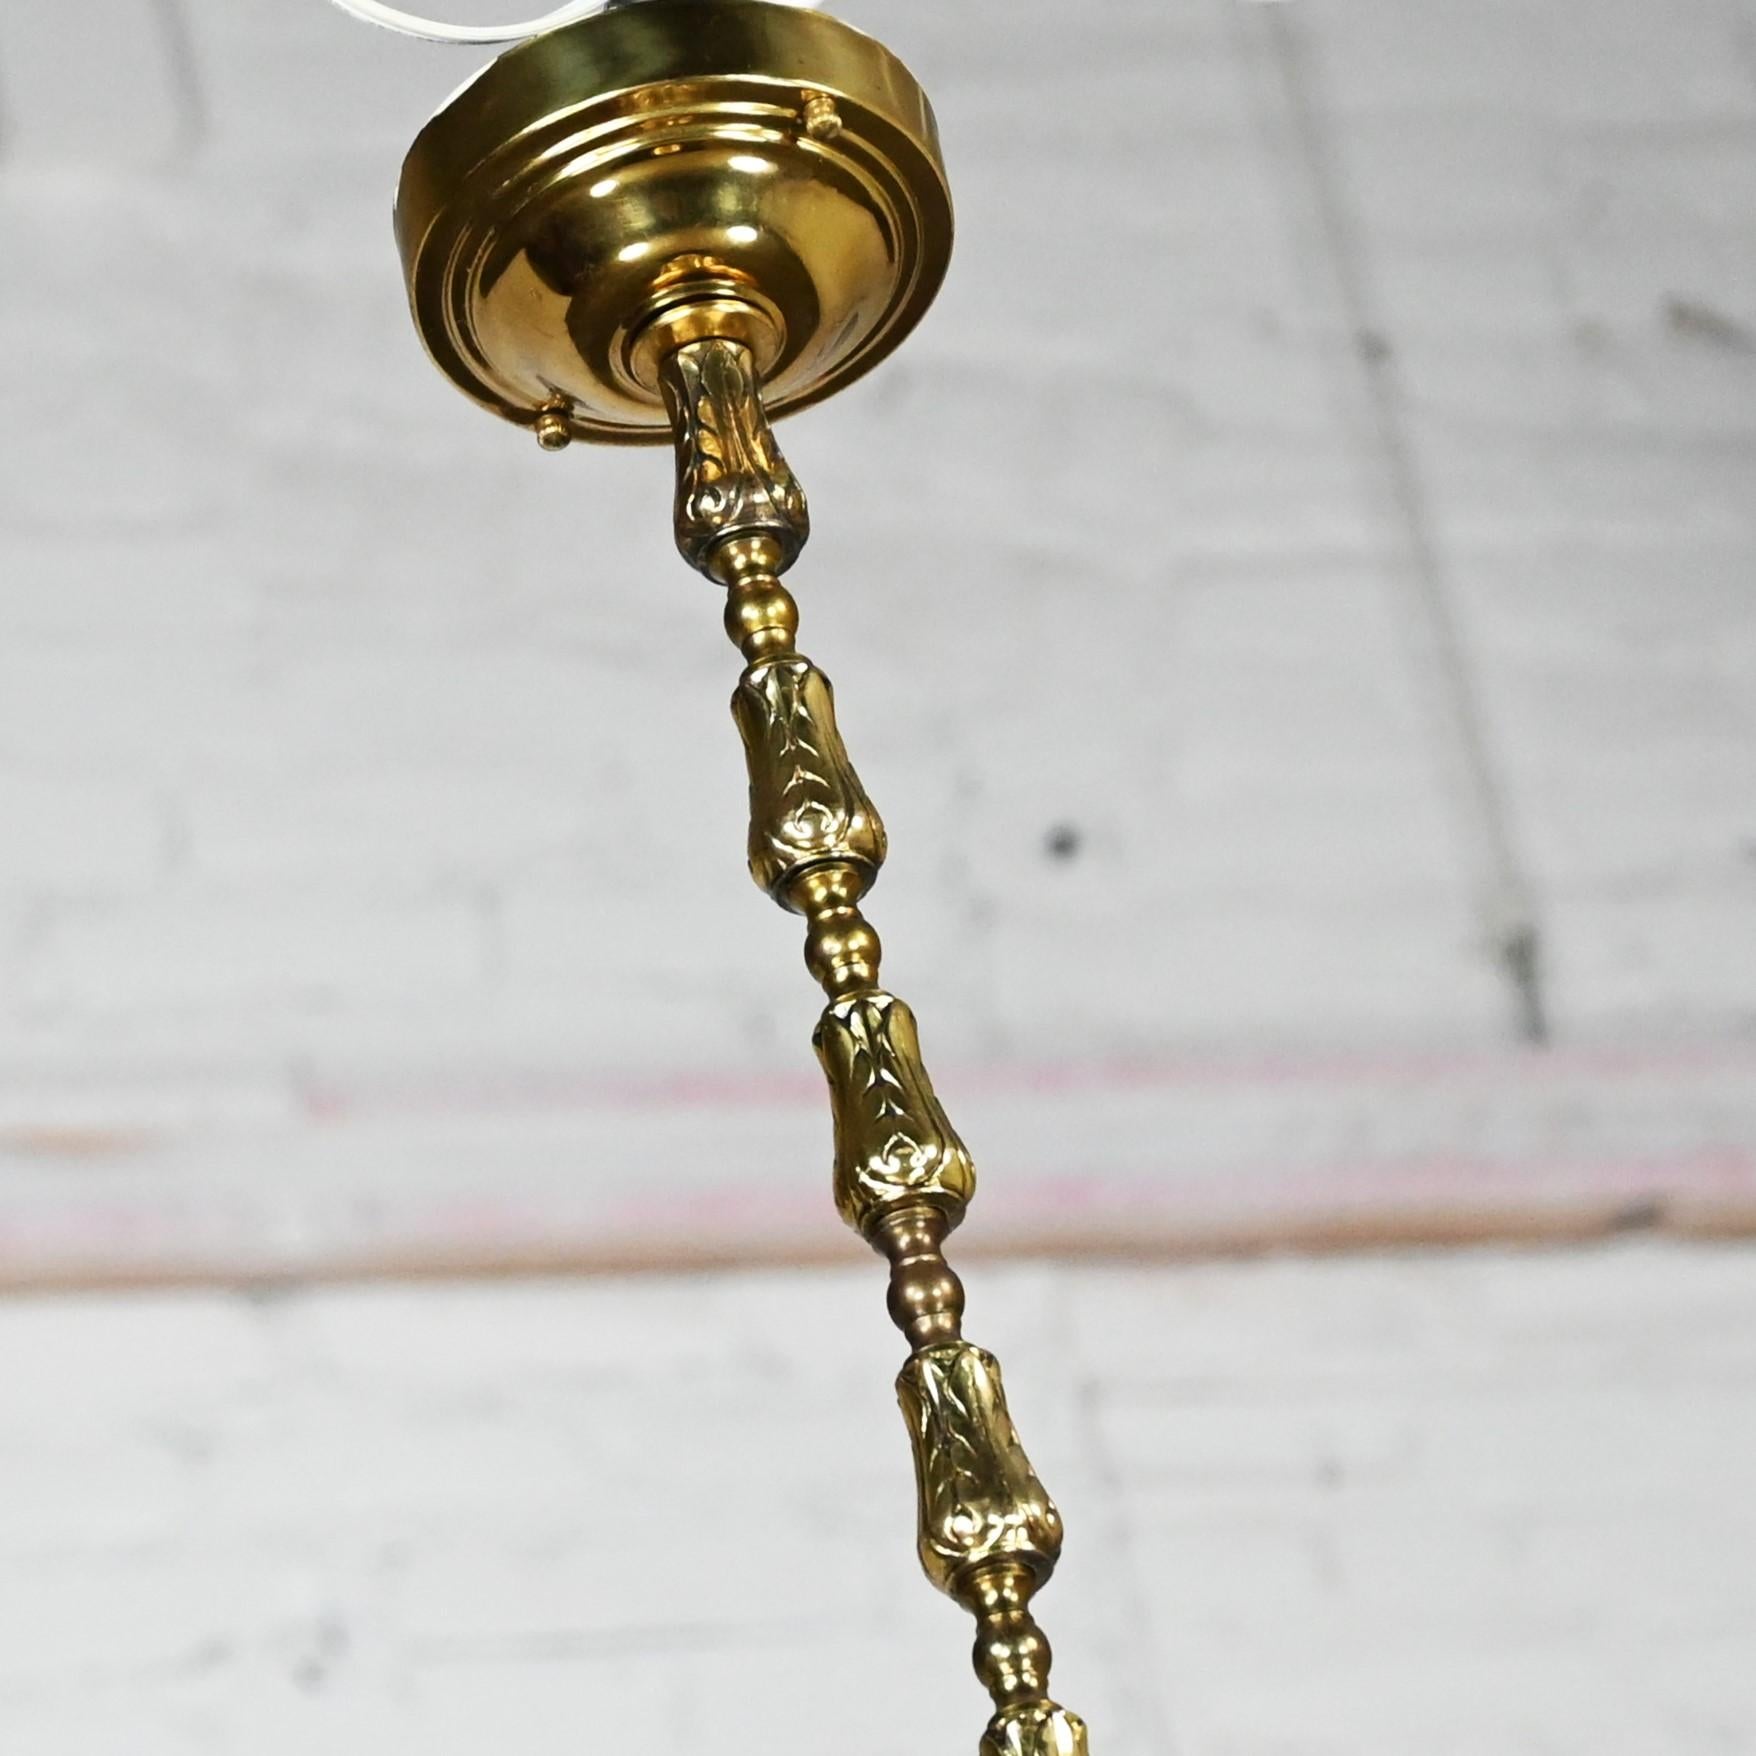 Moorish Style Pierced & Embossed Copper & Brass Pendant Light Made in India For Sale 3